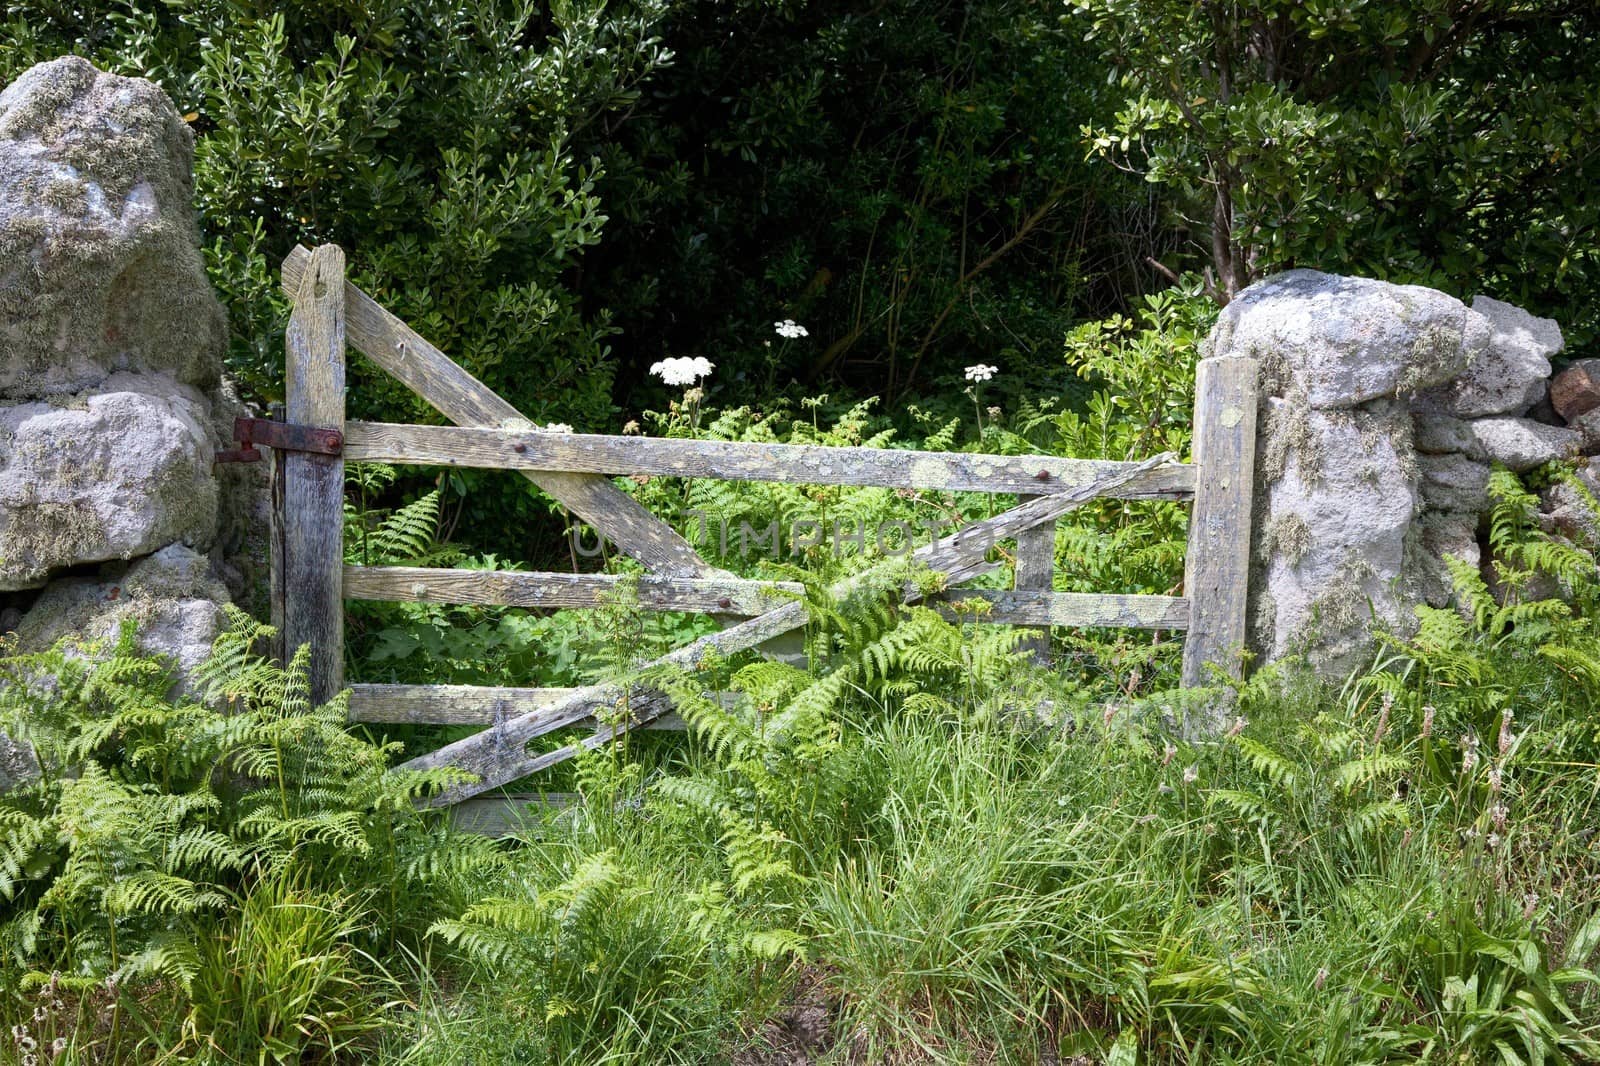 Lichen covered farm gate surrounded by bracken, St Agnes, Isles of Scilly, Cornwall, England.